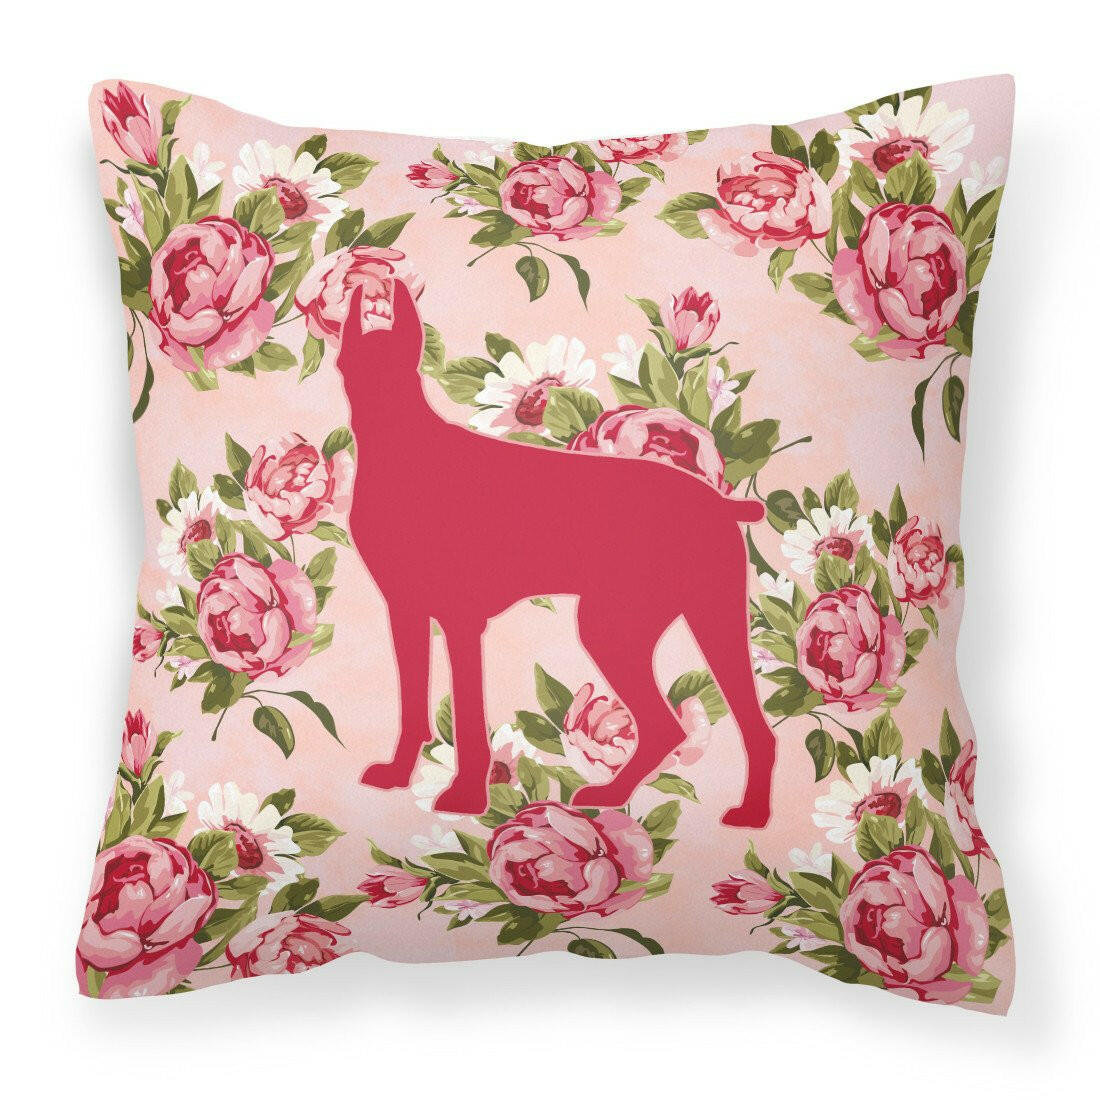 Great Dane Shabby Chic Pink Roses  Fabric Decorative Pillow BB1081-RS-PK-PW1414 - the-store.com